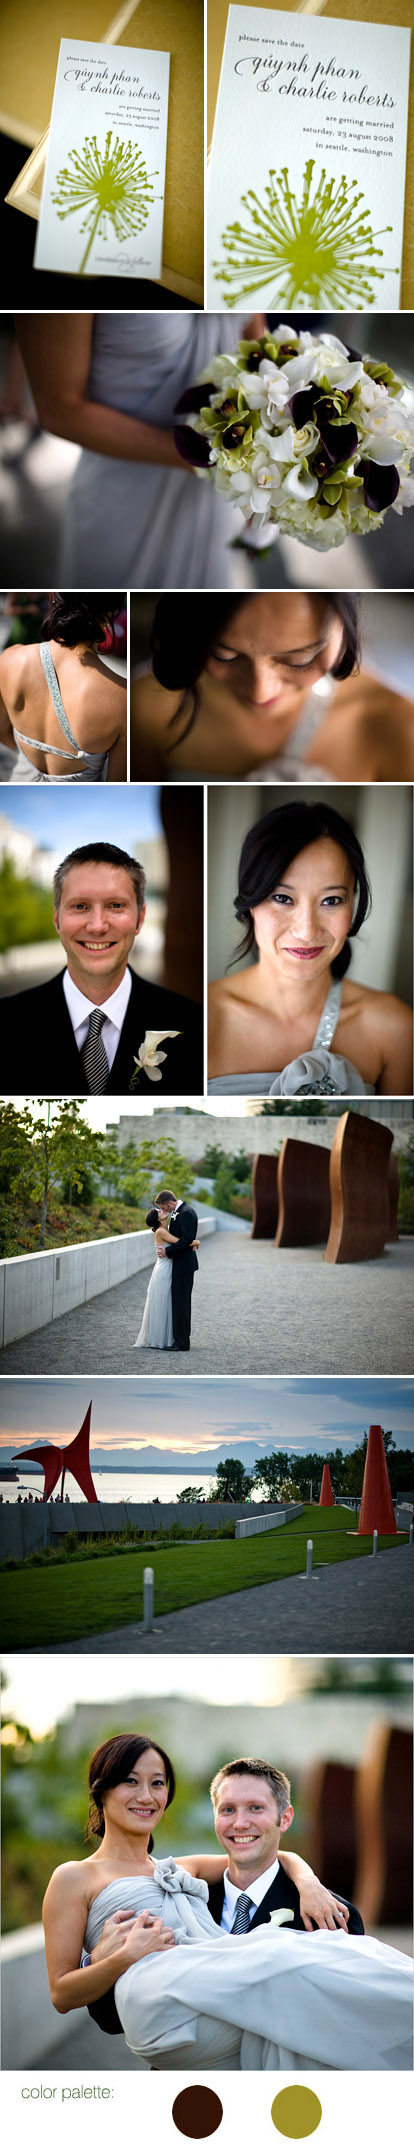 Bradley Hanson Photography, green and brown color palette, modern wedding at the Seattle Olympic Sculpture Park